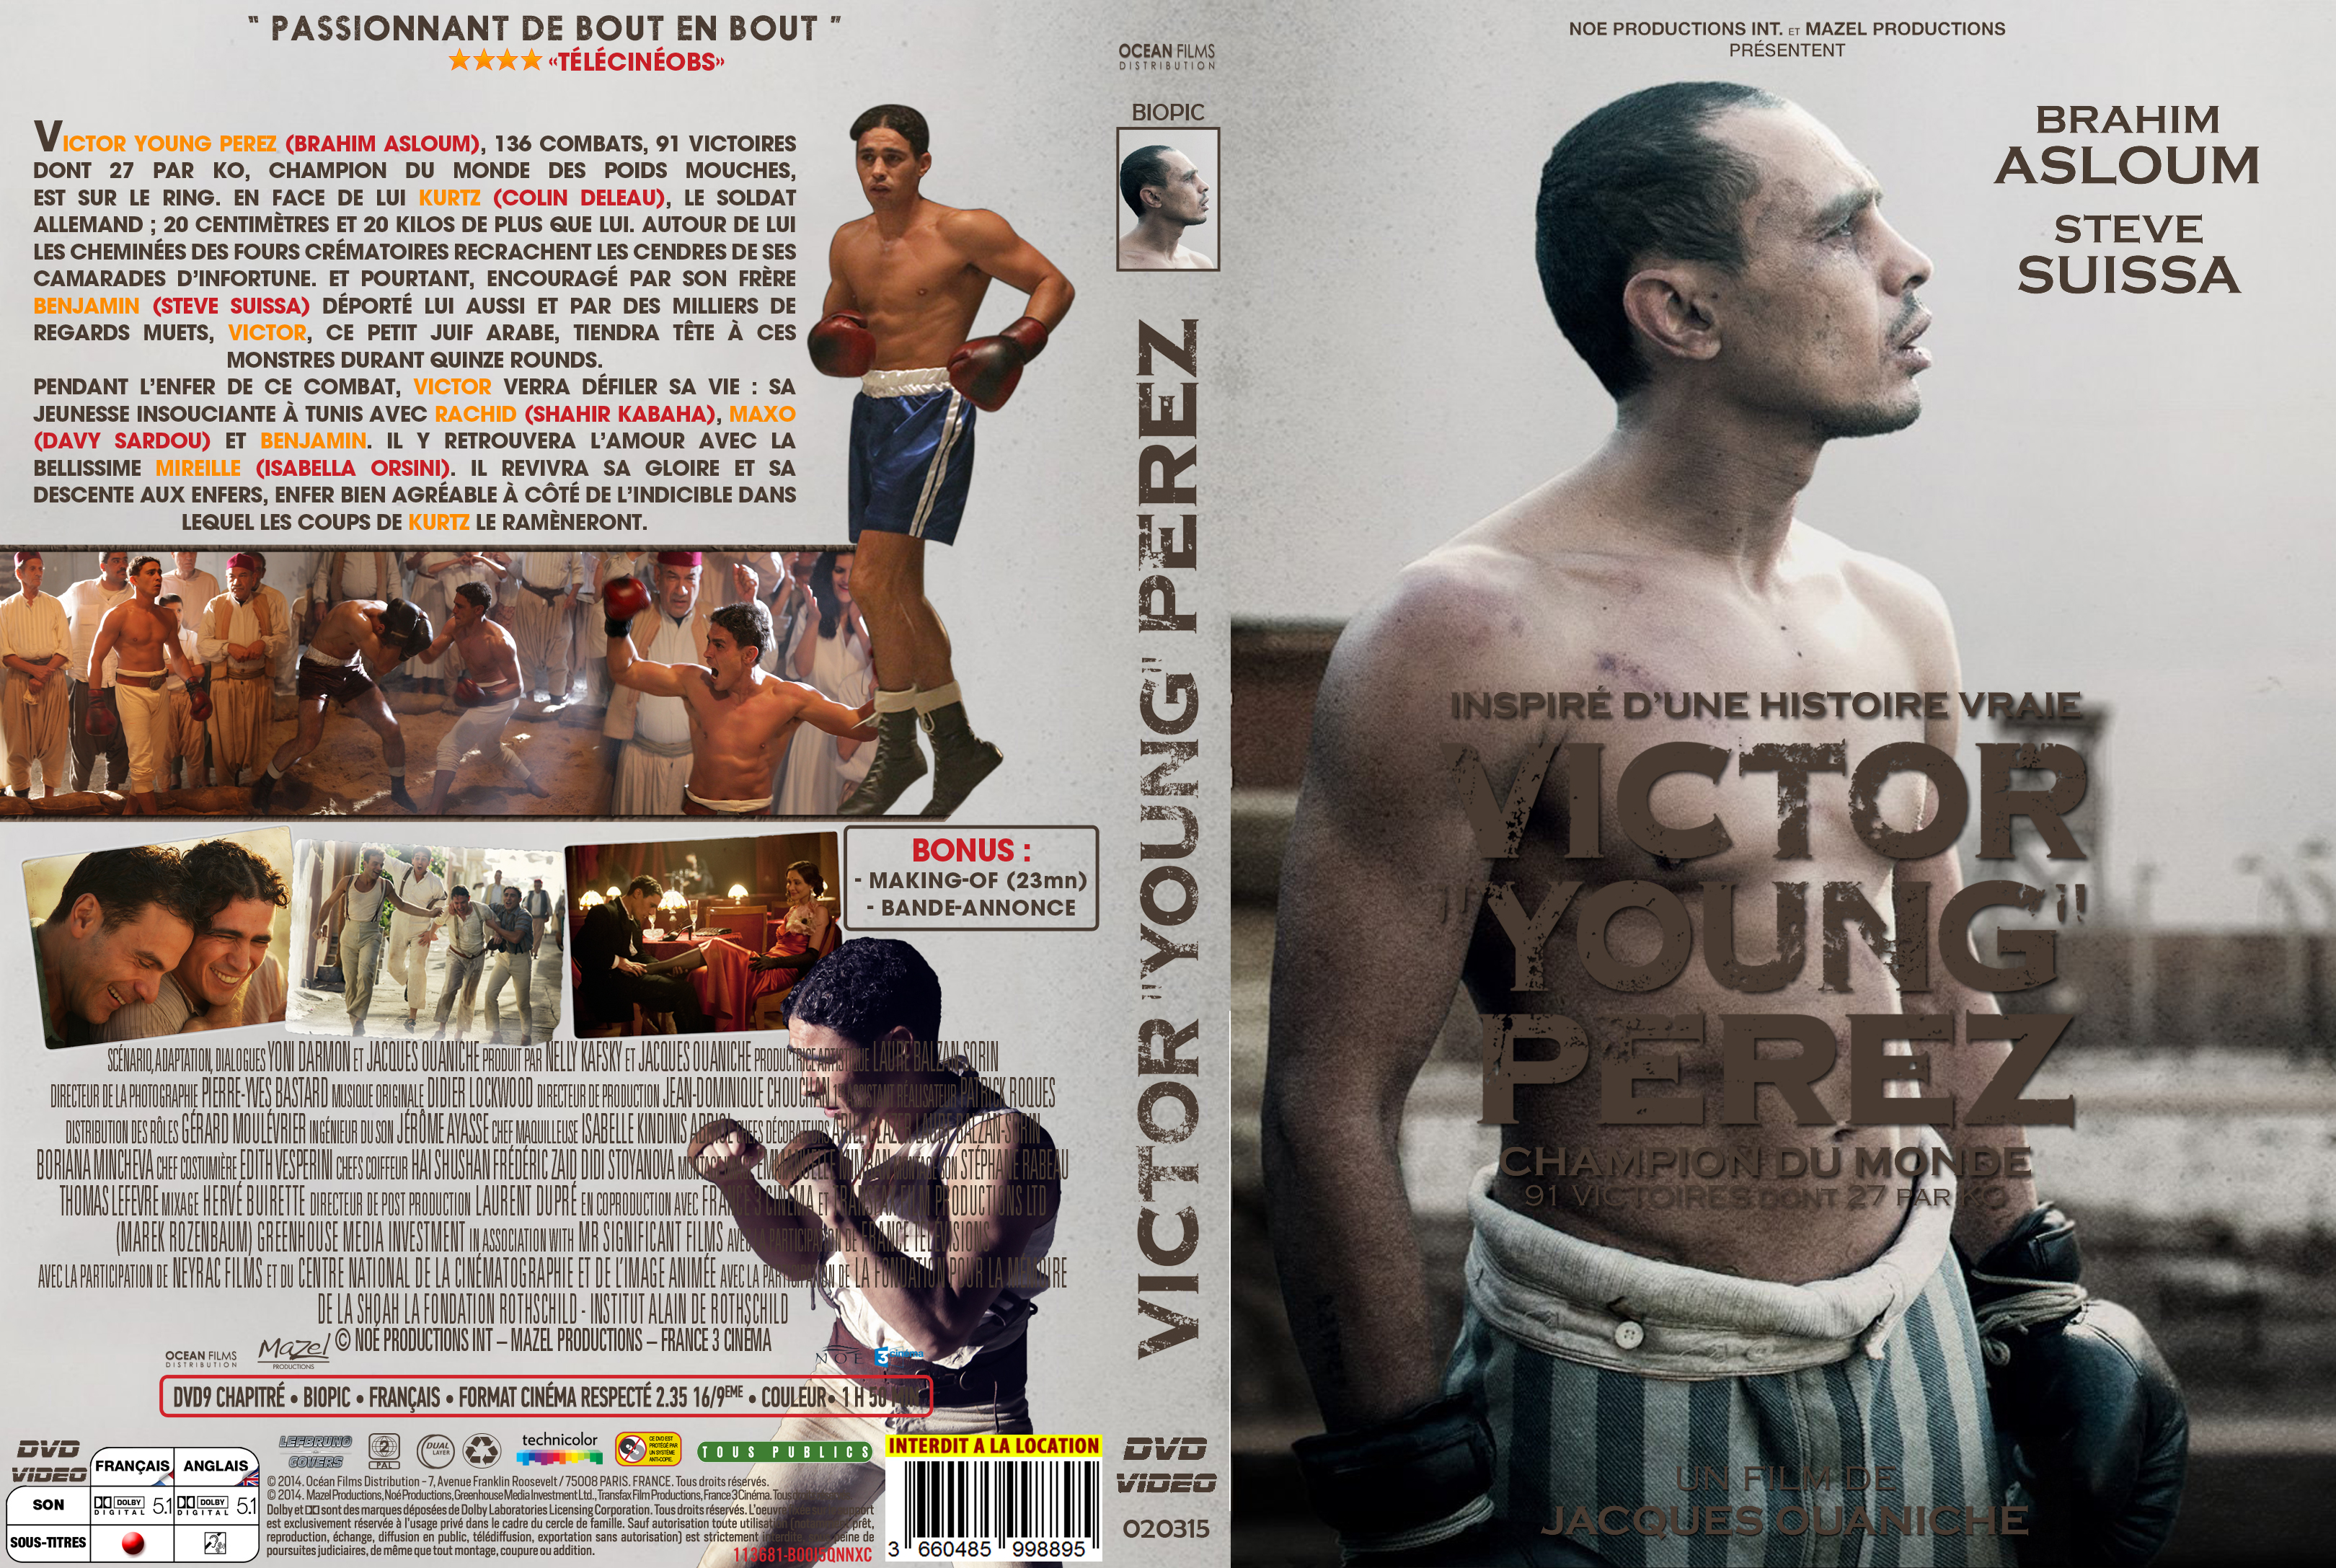 Jaquette DVD Victor Young Perez custom